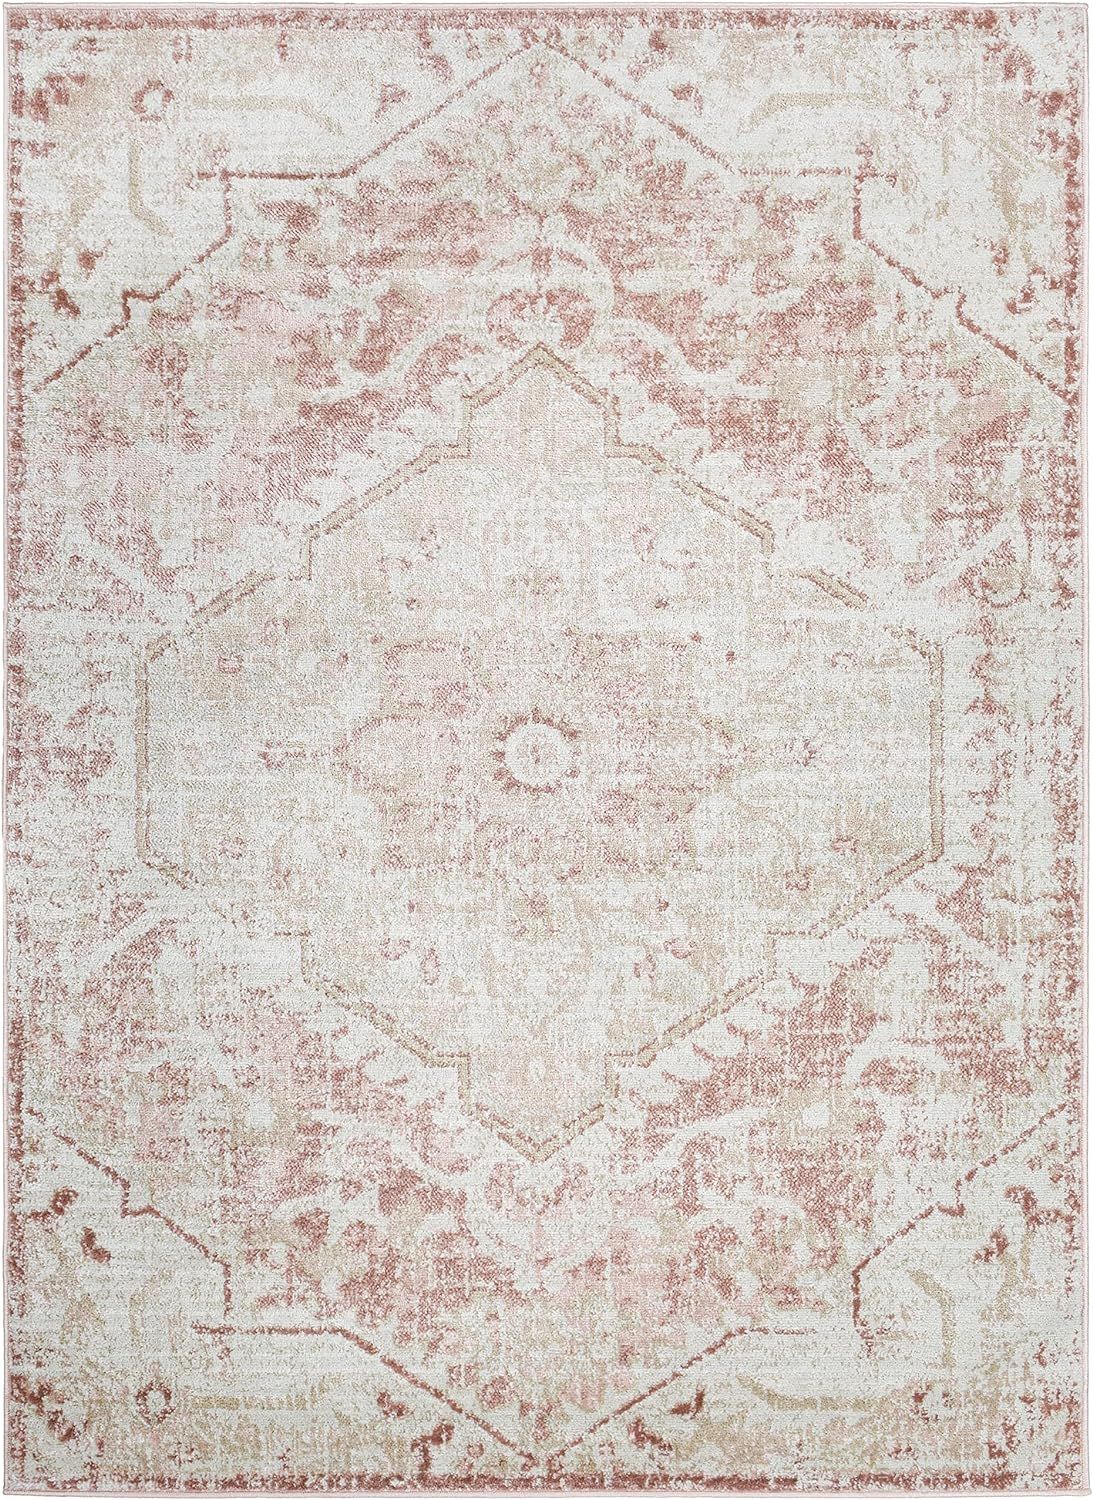 Mark&Day Area Rugs, 5x7 Baflo Traditional Blush Area Rug, Pink/White/Beige Carpet for Living Room... | Amazon (US)